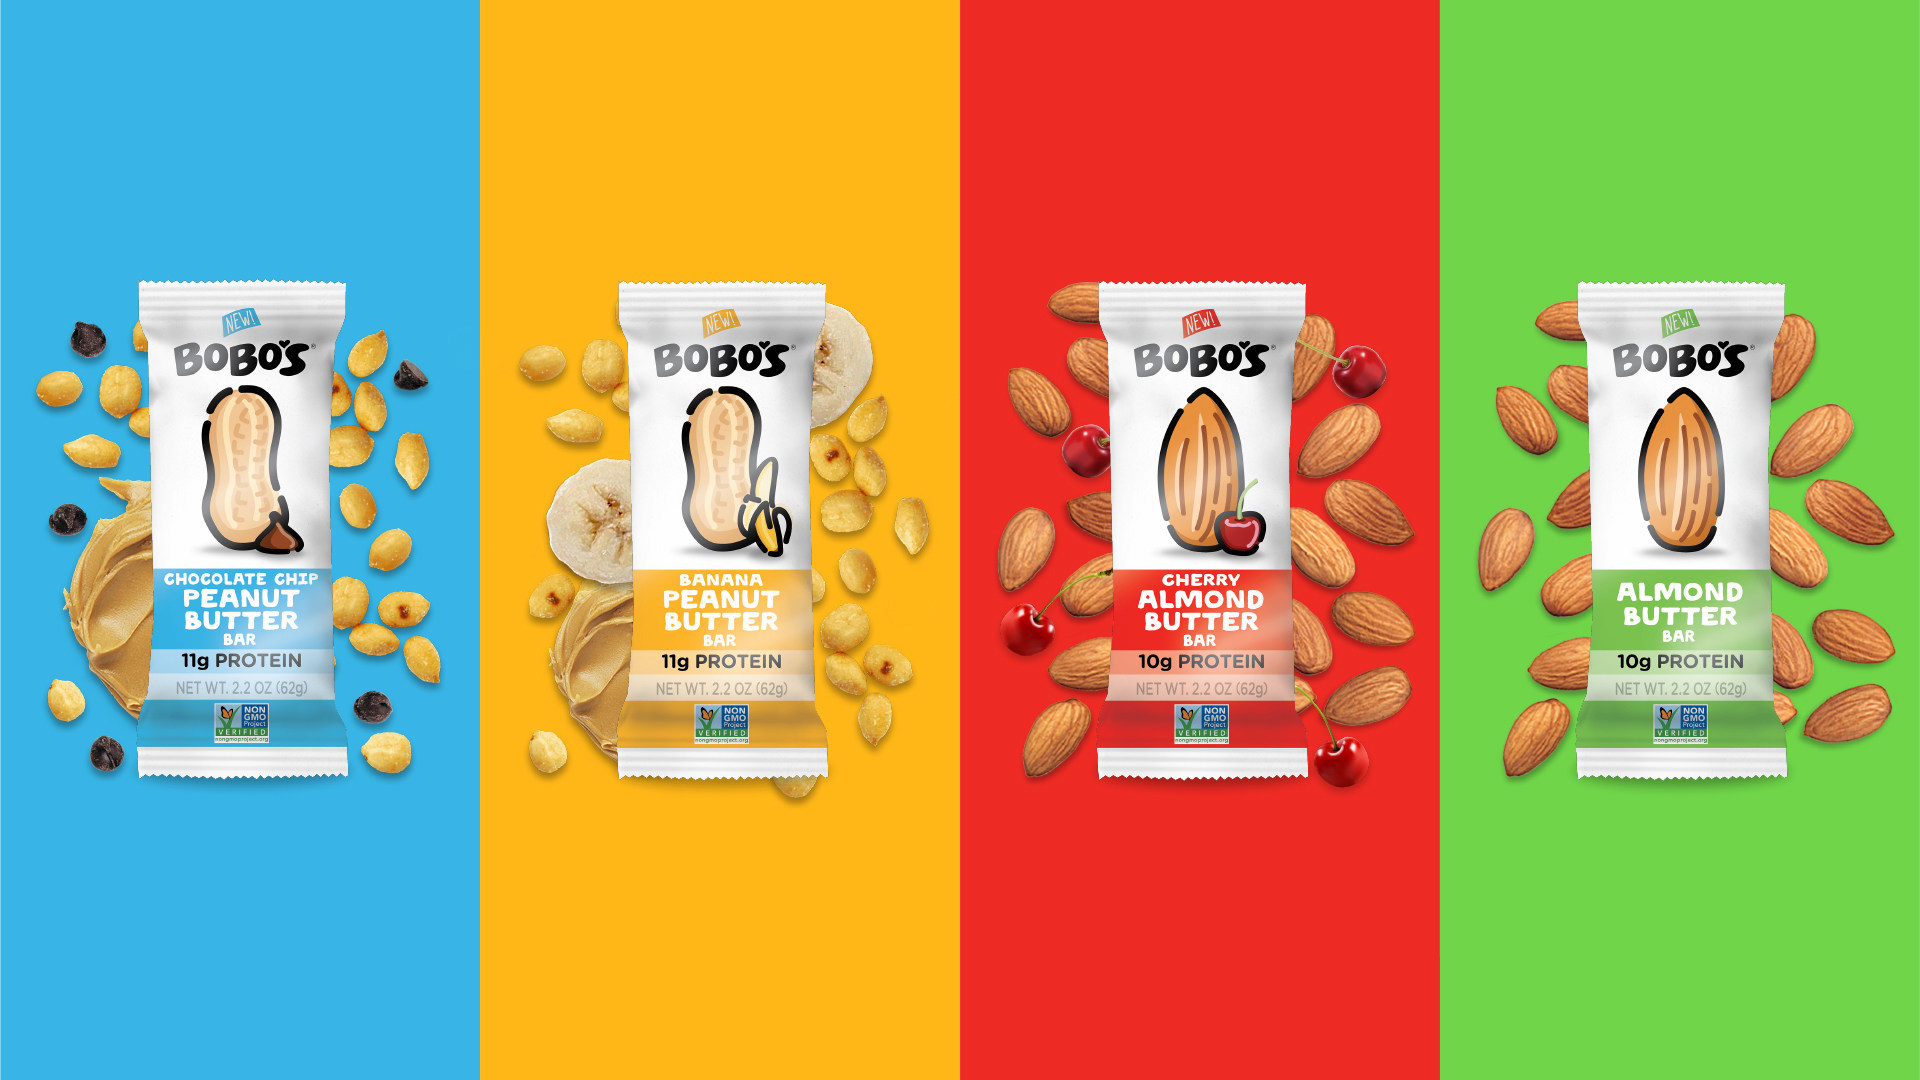 Bobo's releases range of nut-butter protein bars in the US